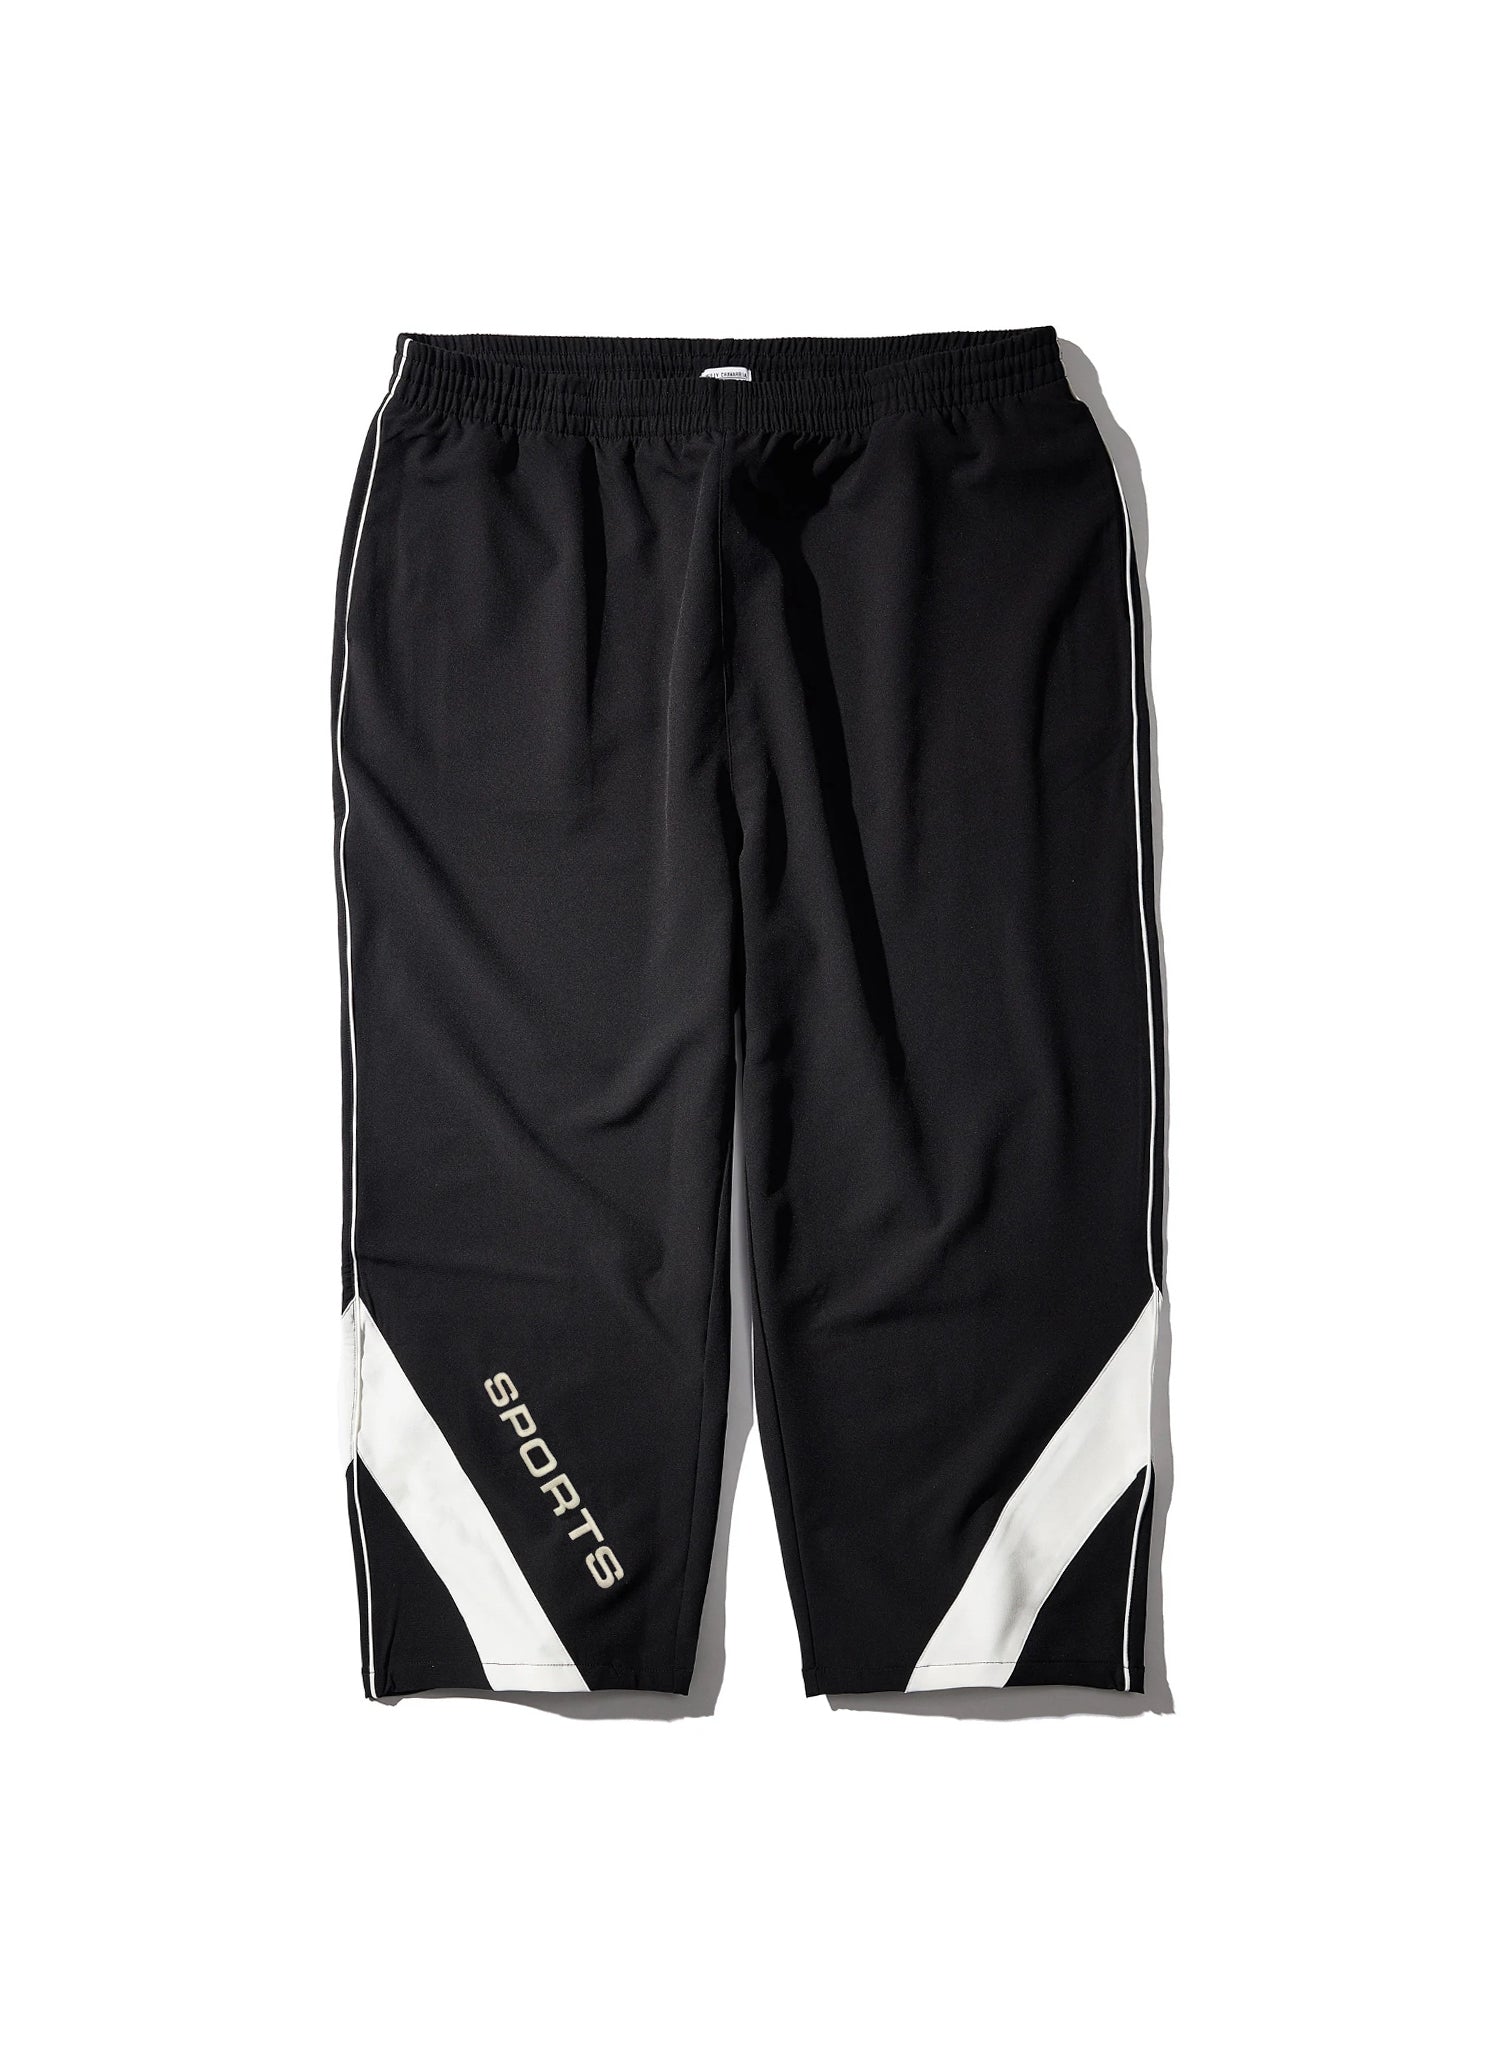 WILLY CHAVARRIA / WILLY SPORTS PREGAME PANT